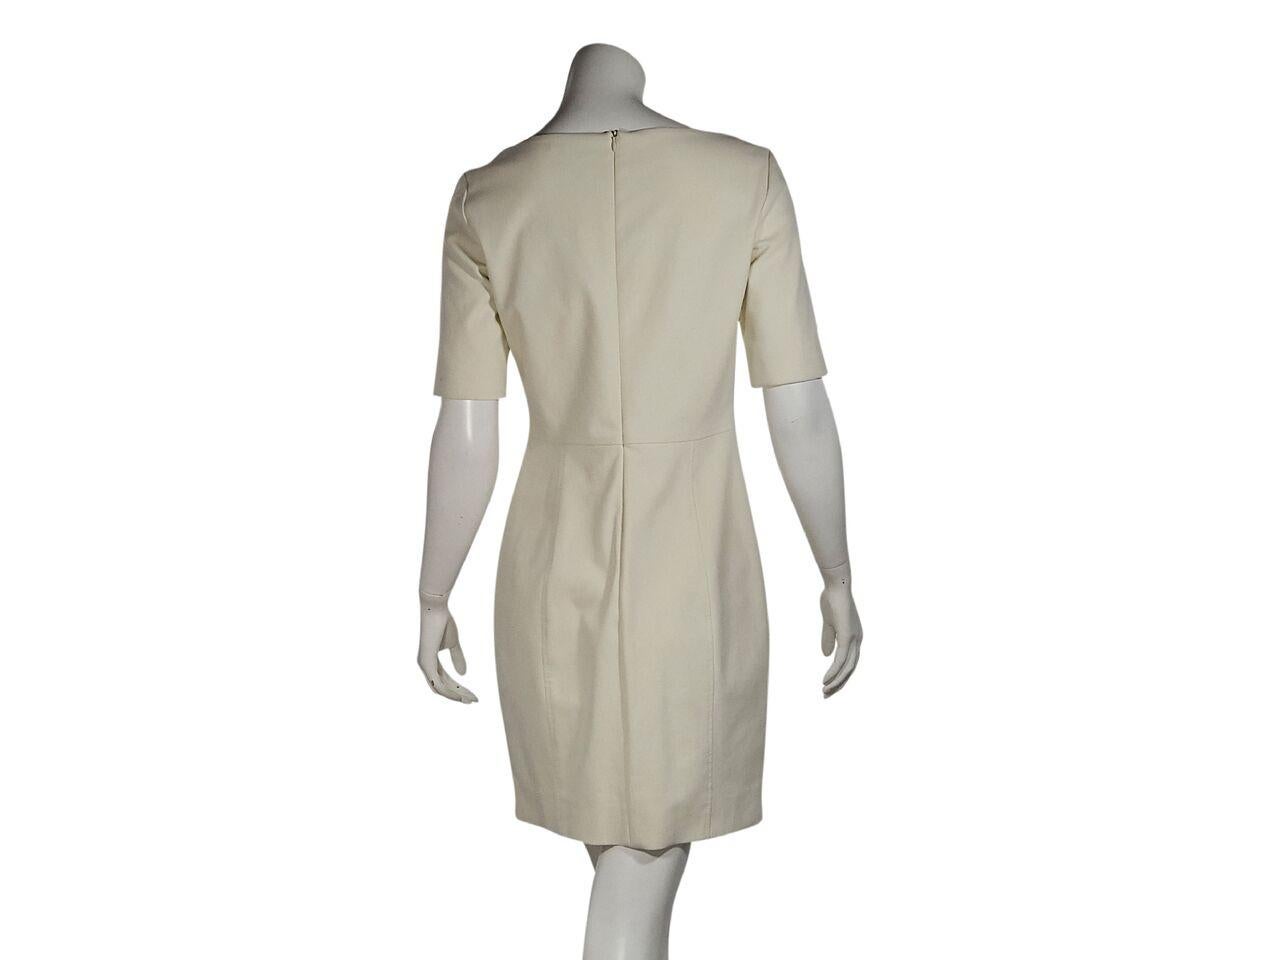 Product details:  Ivory stretch cotton-blend sheath dress by The Row.  Boatneck.  Elbow-length sleeves.  Concealed back zip closure.  34